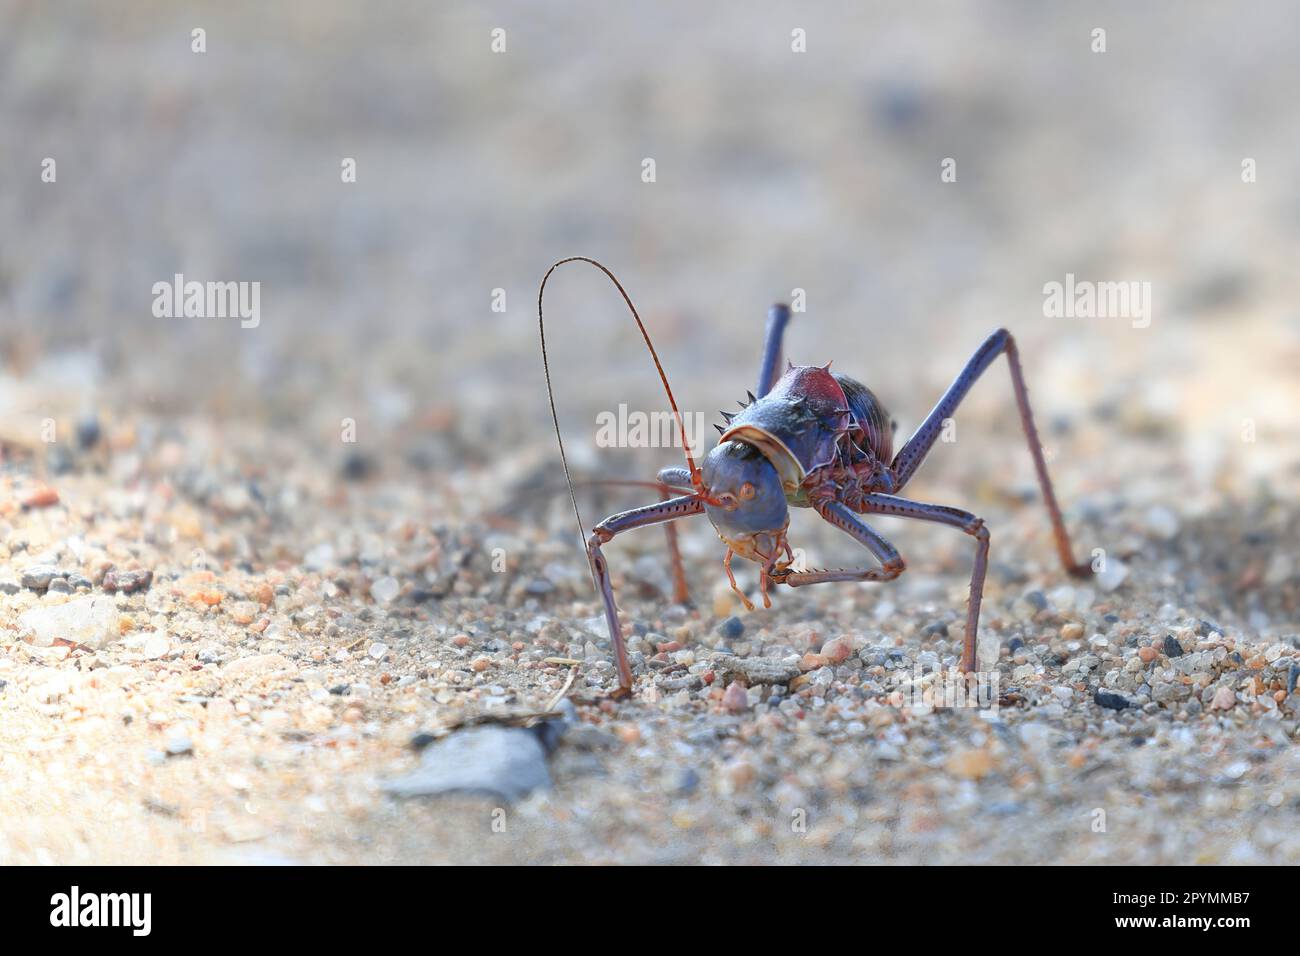 close up of a cricket on the ground of Namibia Stock Photo